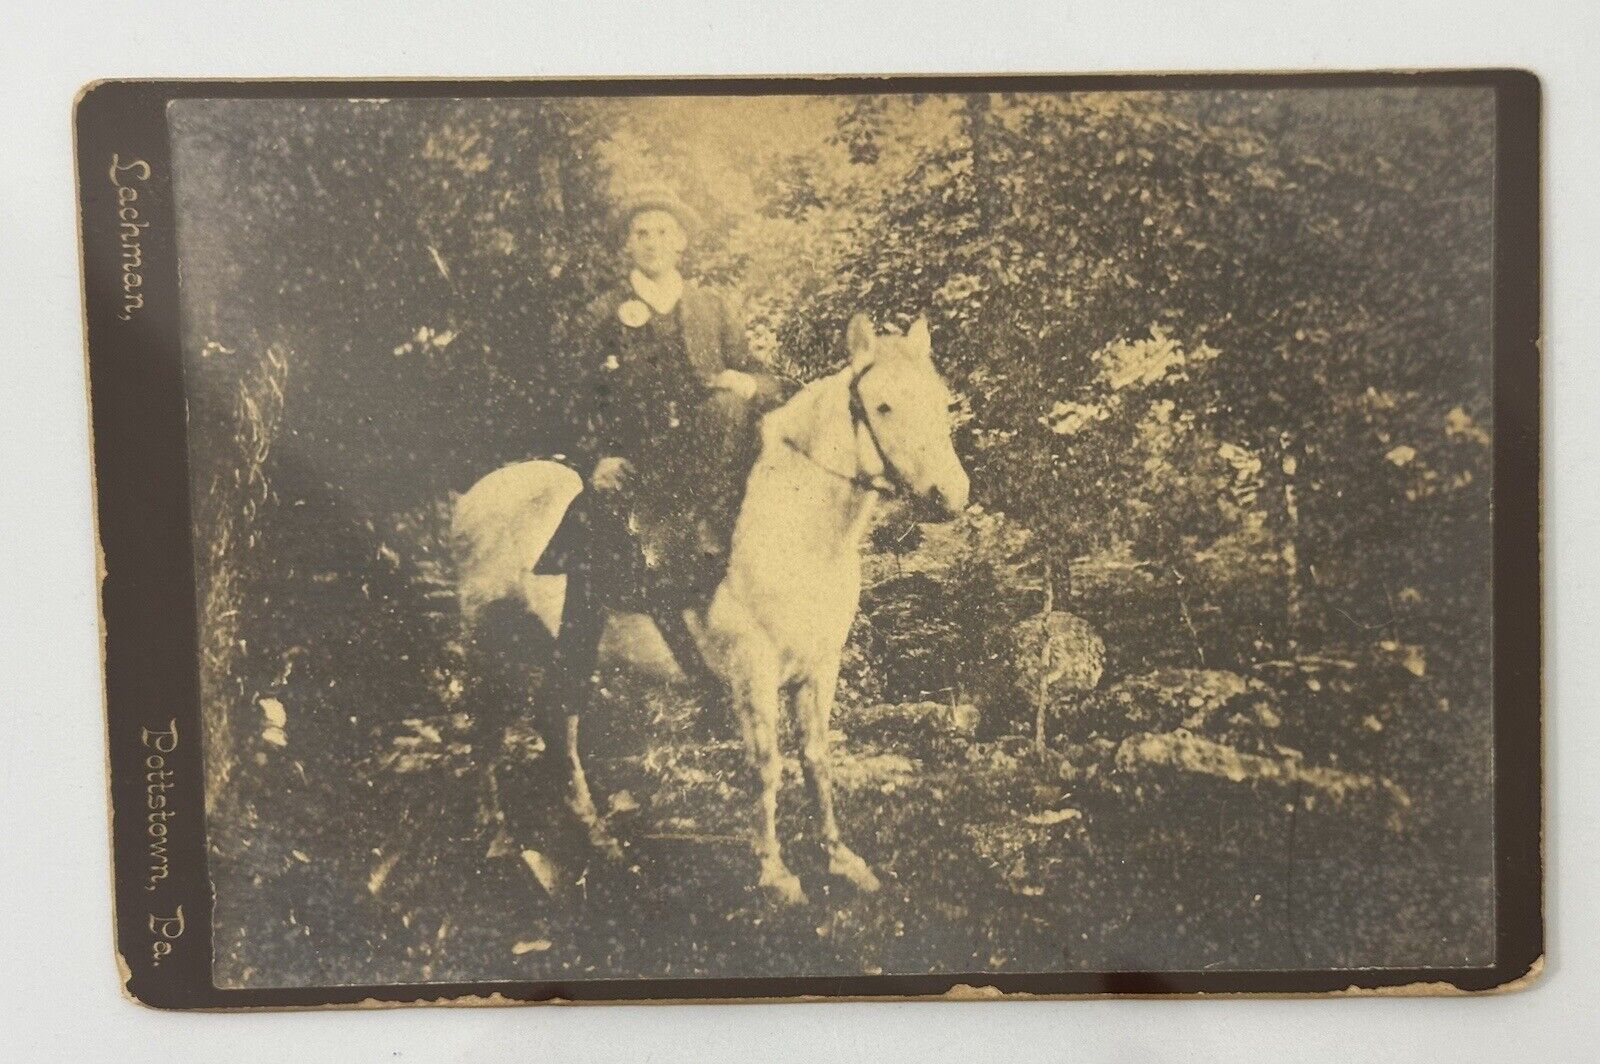 Antique Cabinet Card Photo 1880s Victorian In Hard Case Young Man On Horse 1880